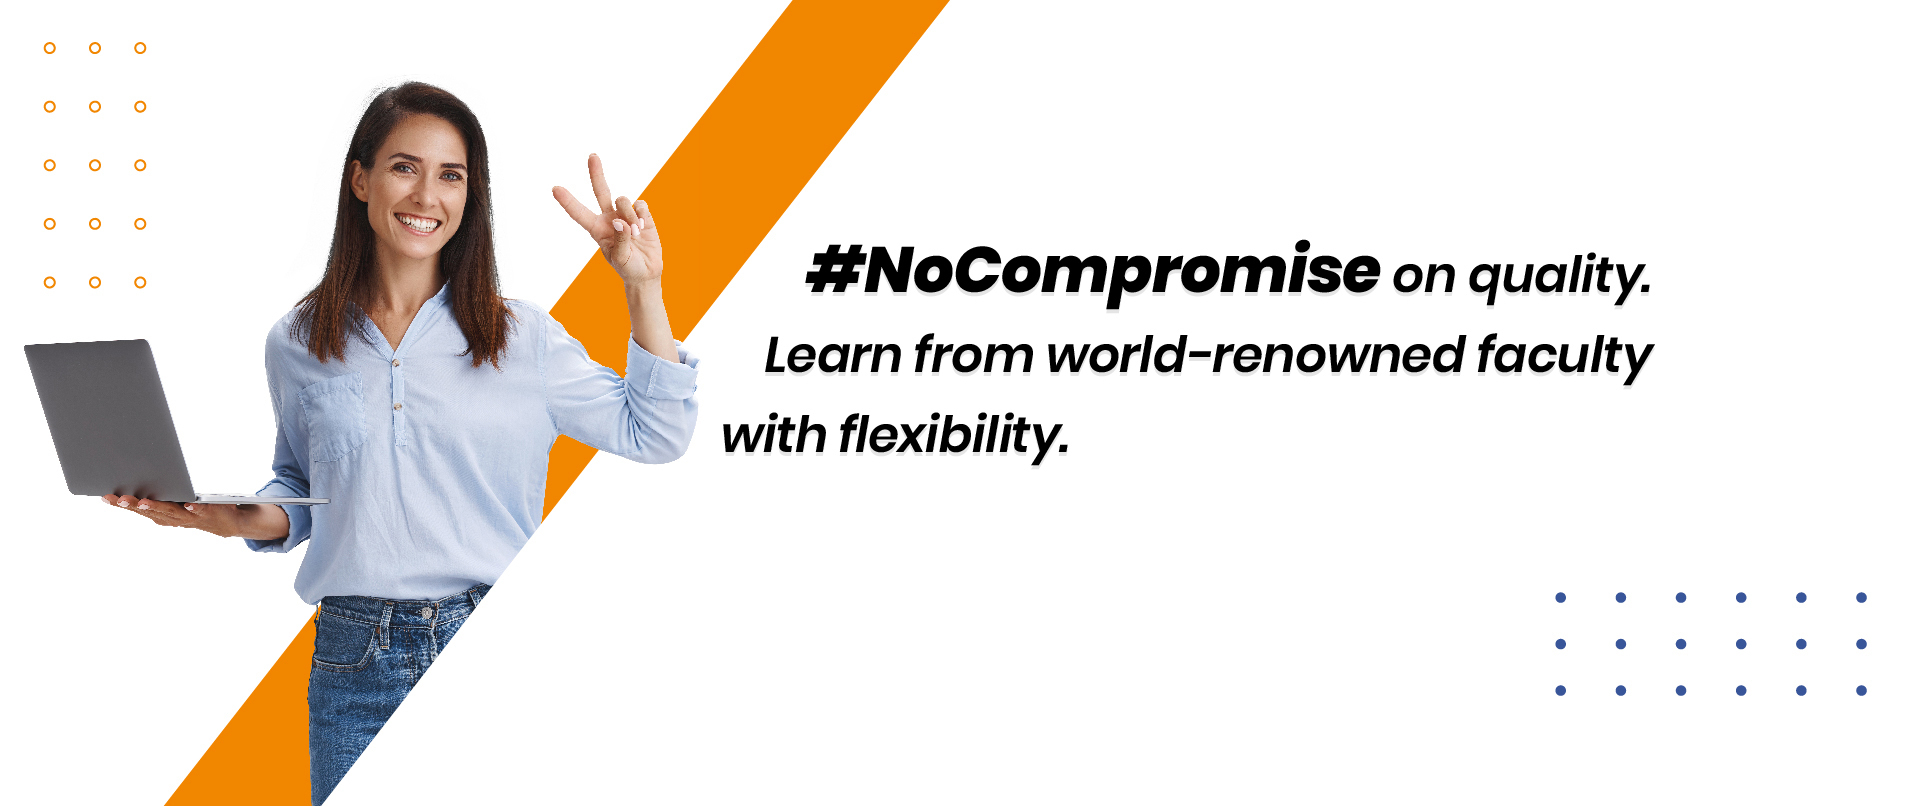 #NoCompromise on quality.
Learn from world-renowned faculty
pr with flexibility.